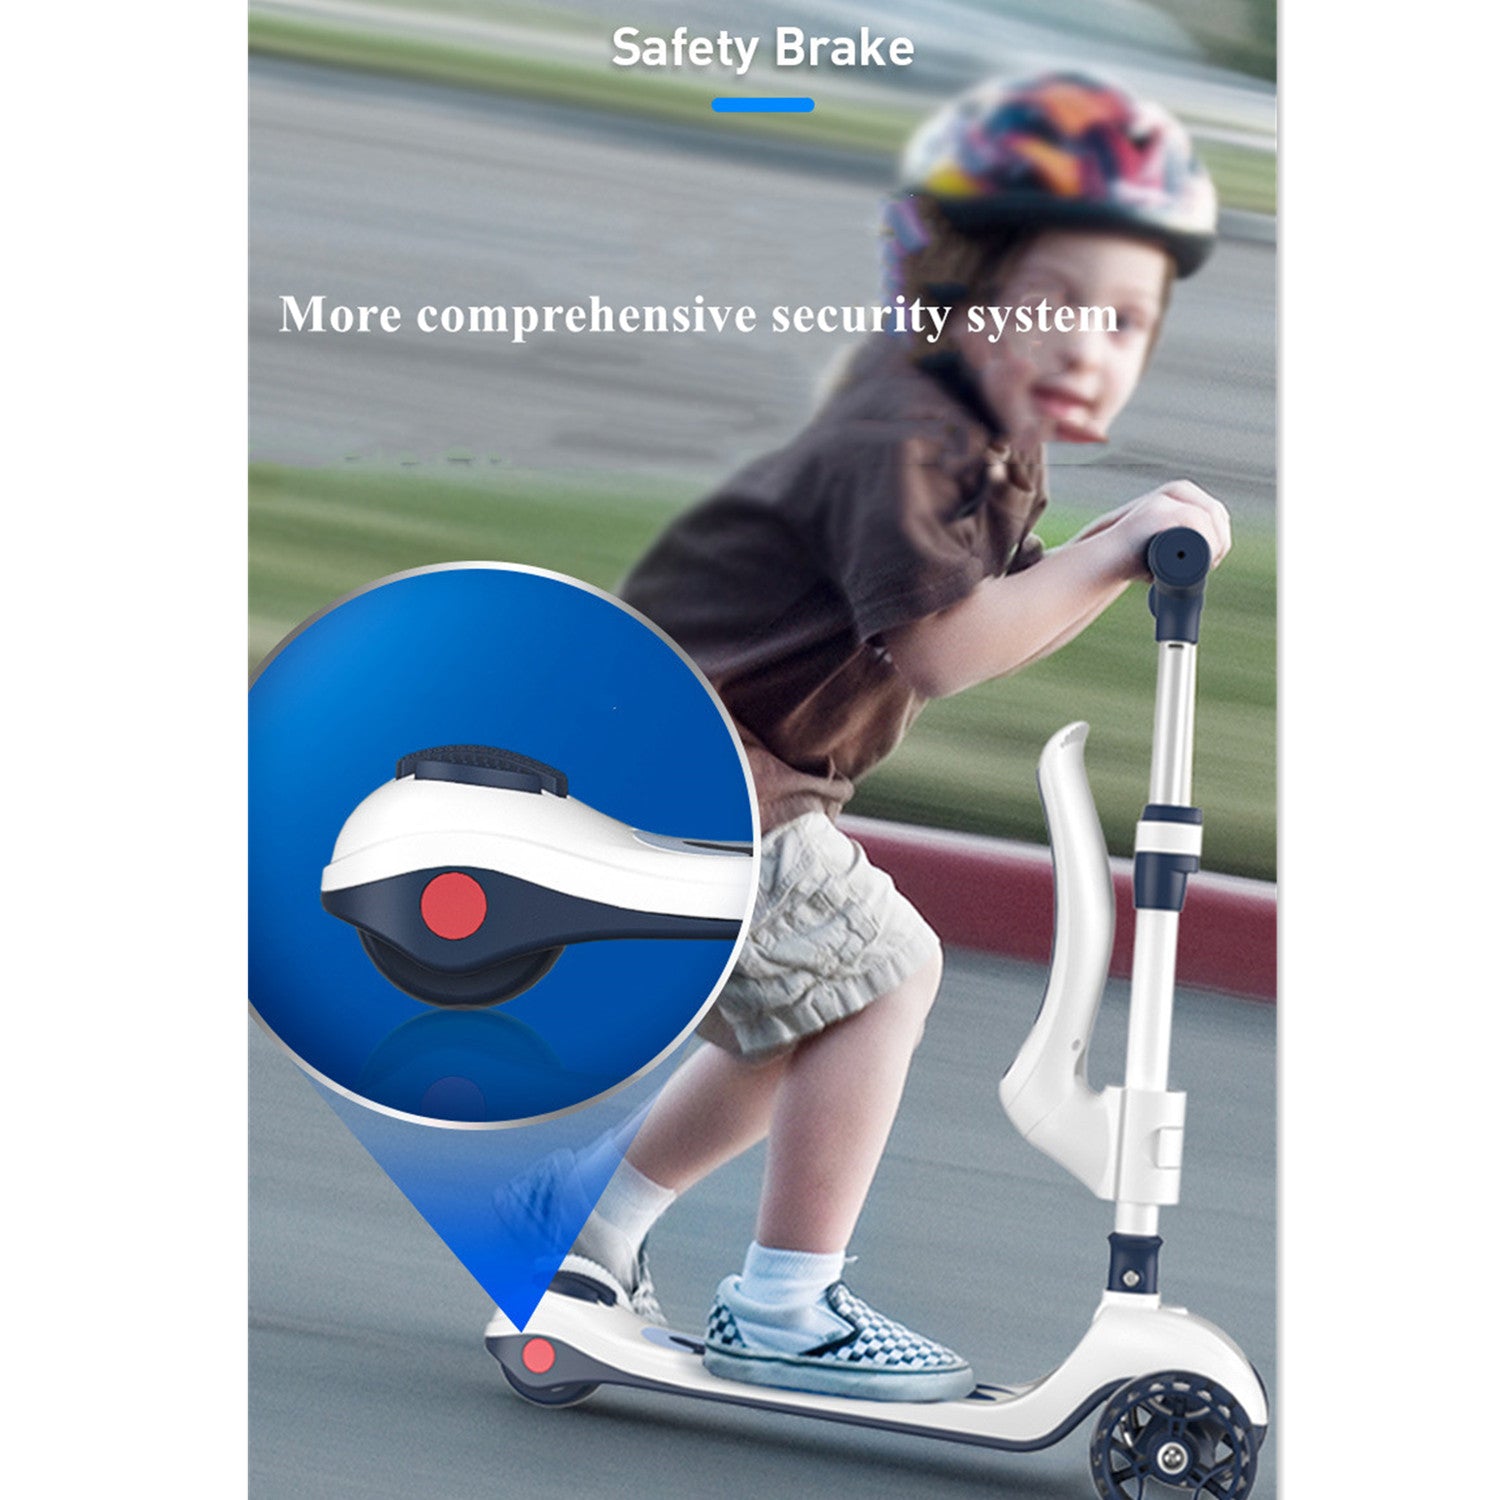 Kids Scooter 2 In 1 Foldable -Blue Ice Cream